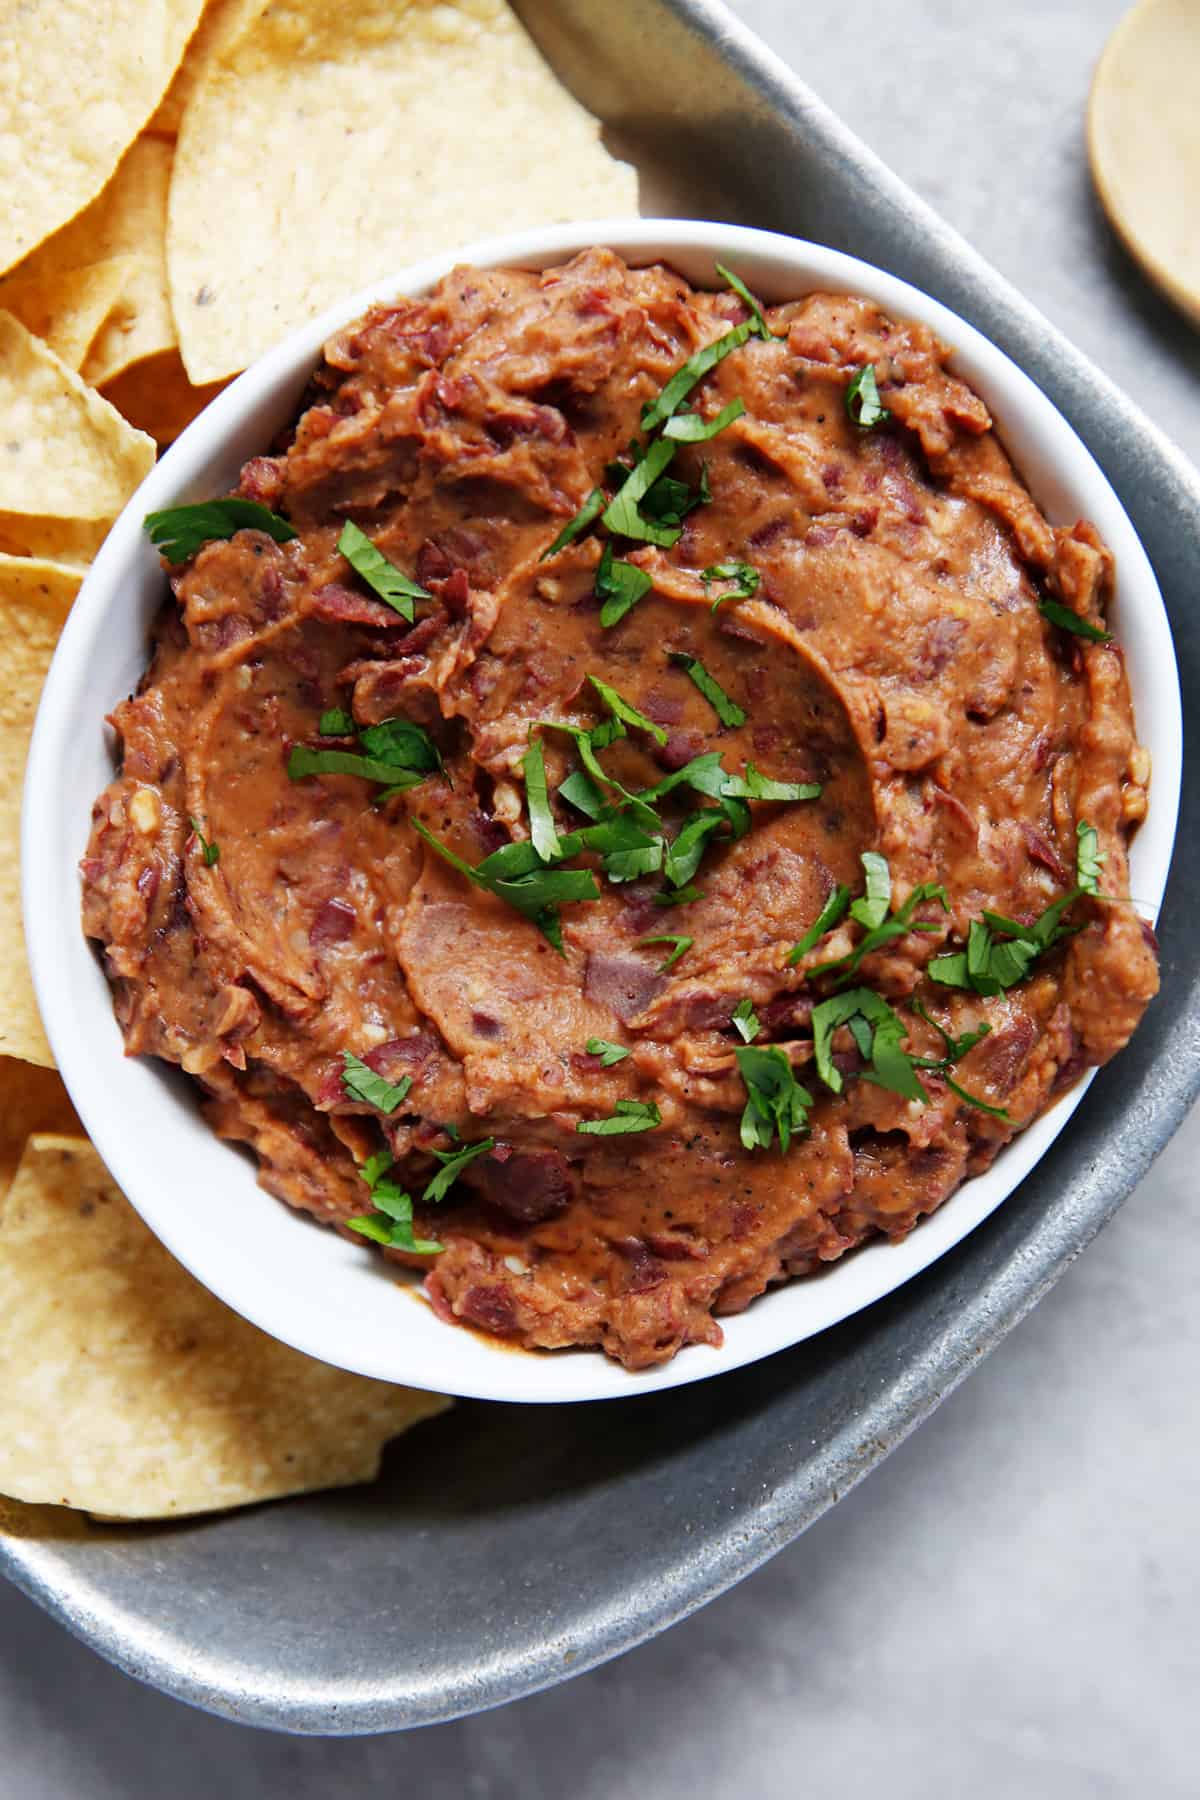 refried beans recipe from scratch